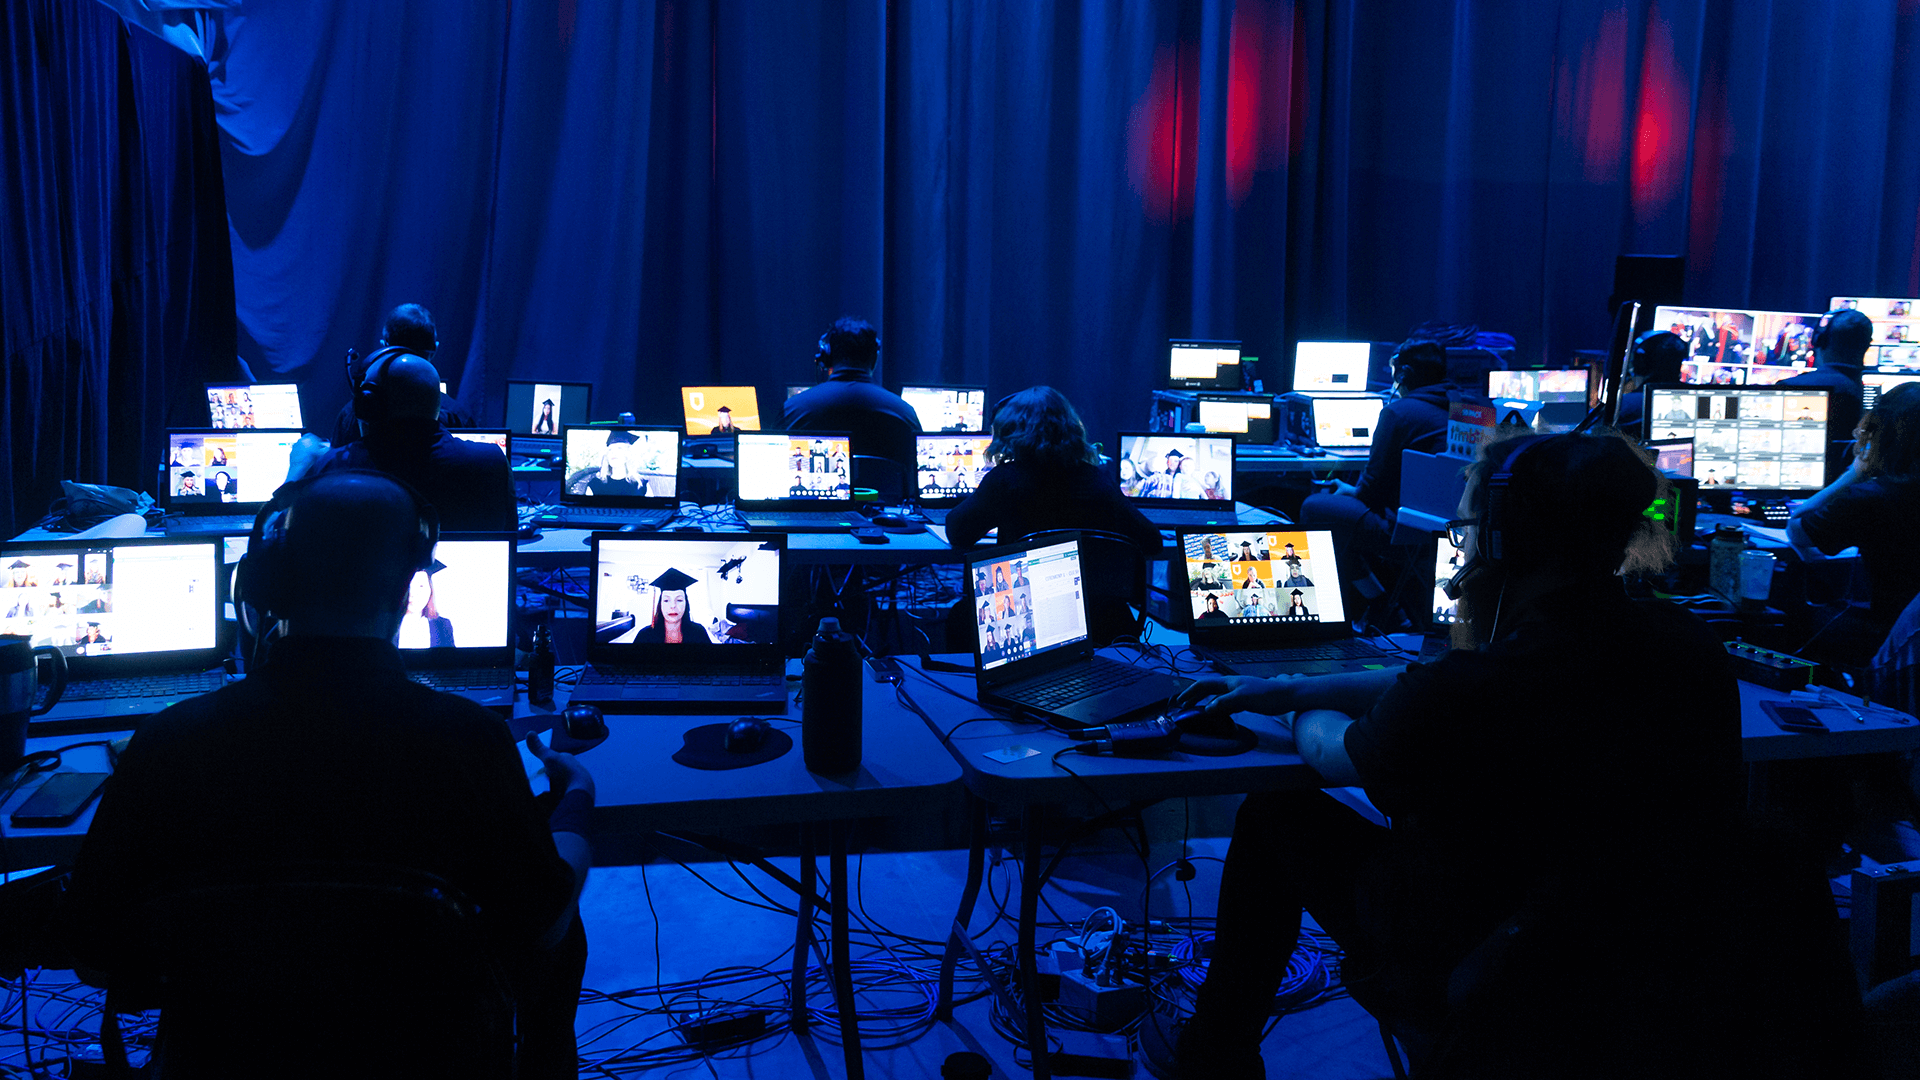 backstage of the convocation ceremonies. dark photo with many computer screens